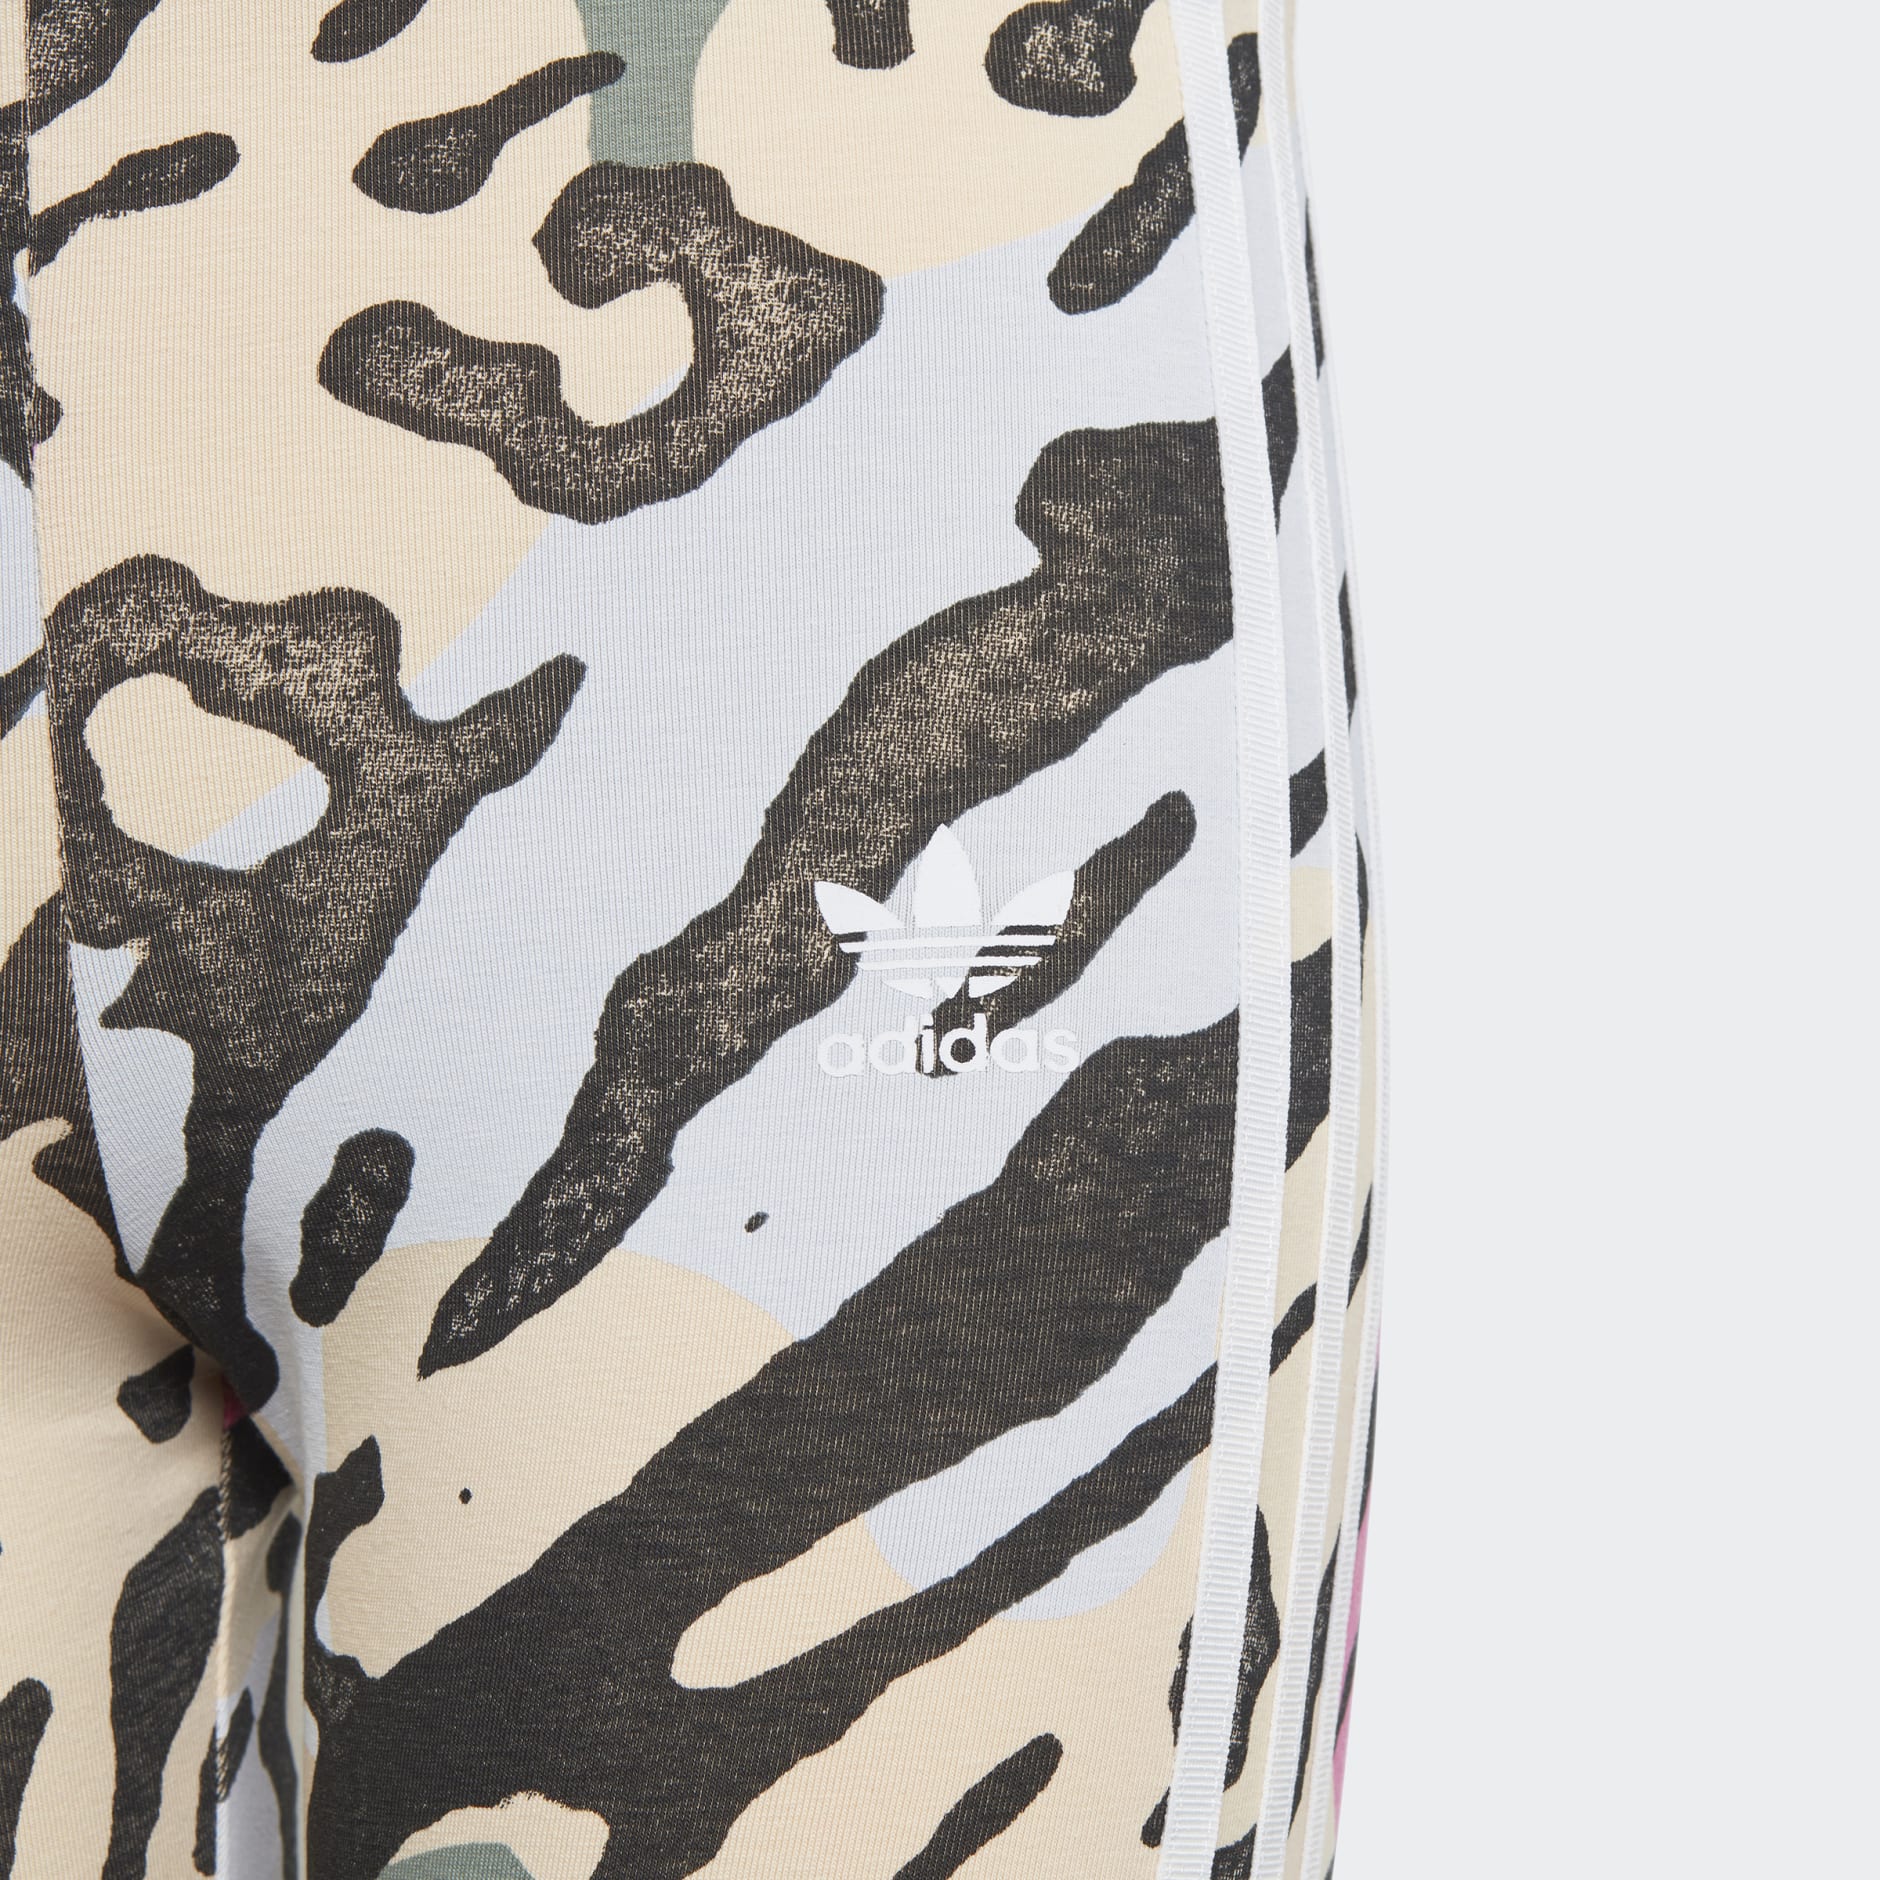 Adidas Originals 'Animal Abstract' Leggings In Brown With Zebra